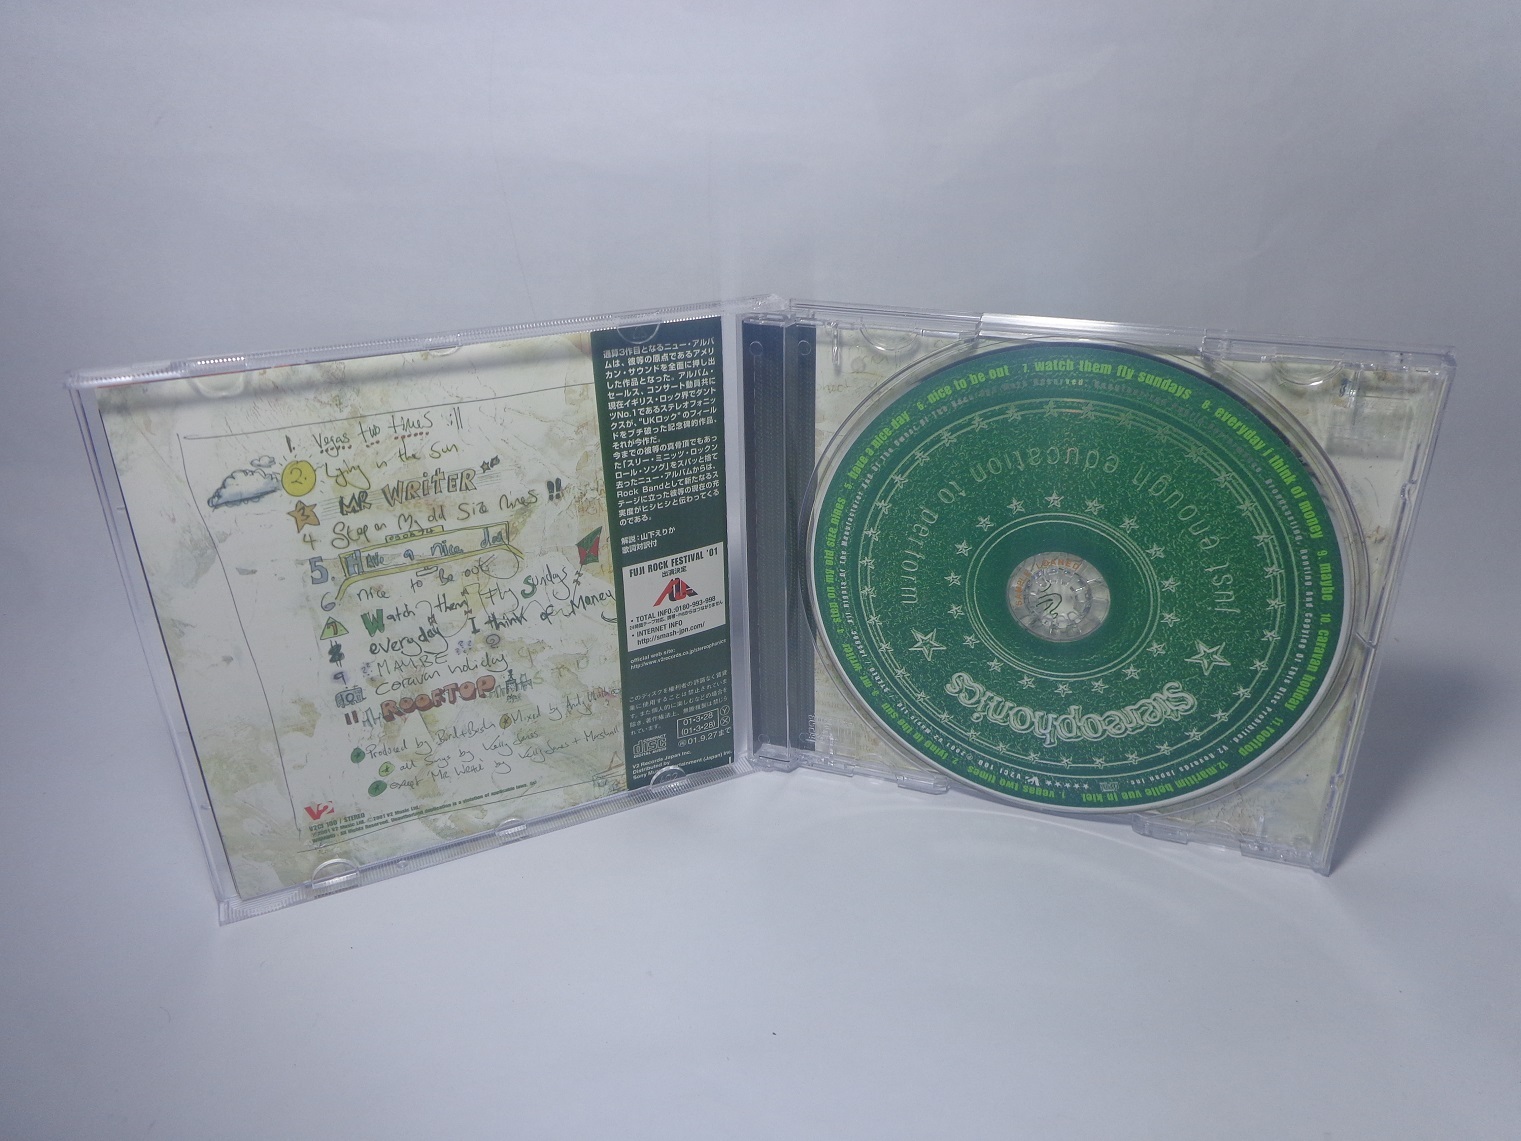 CD - Stereophonics - Just Enough Education to Perform (Japan)